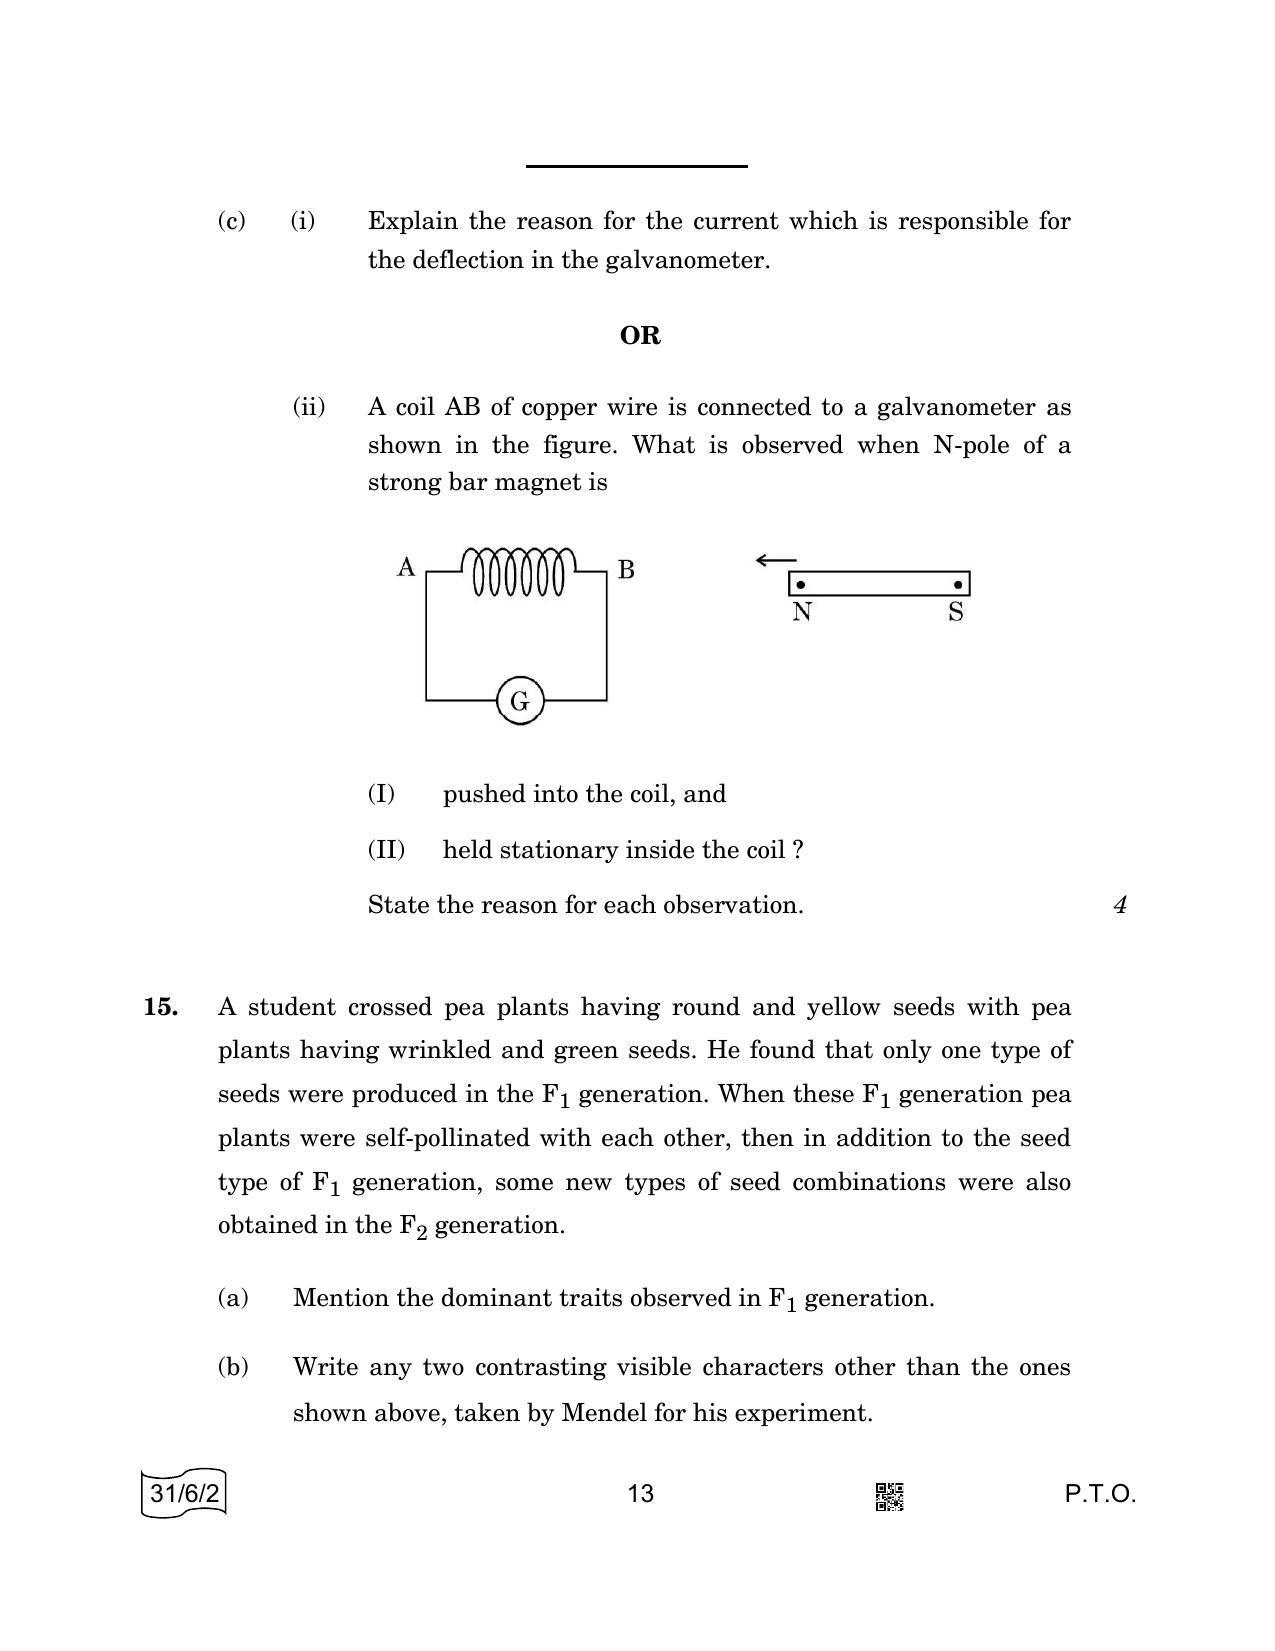 CBSE Class 10 31-6-2 SCIENCE 2022 Compartment Question Paper - Page 13